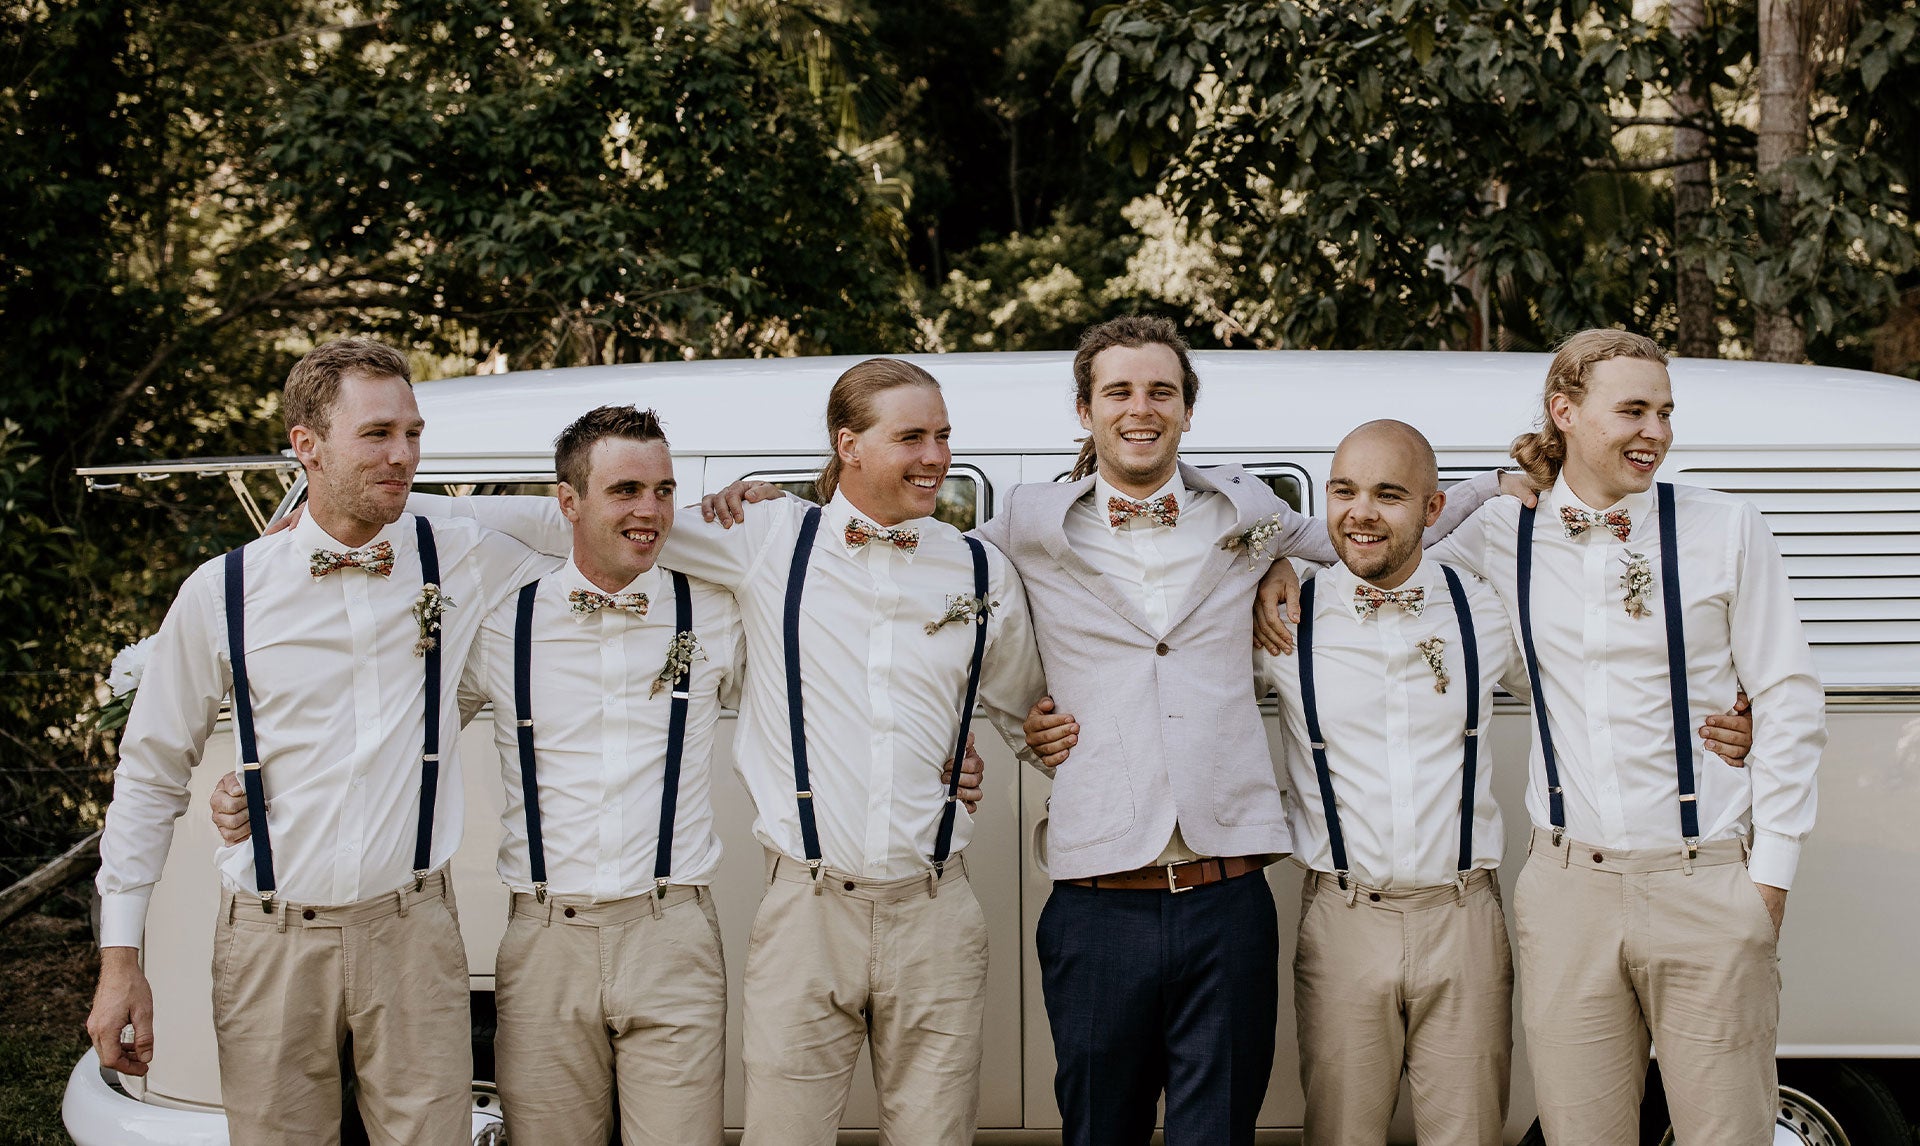 Why You Want to Wear Suspenders to Your Wedding